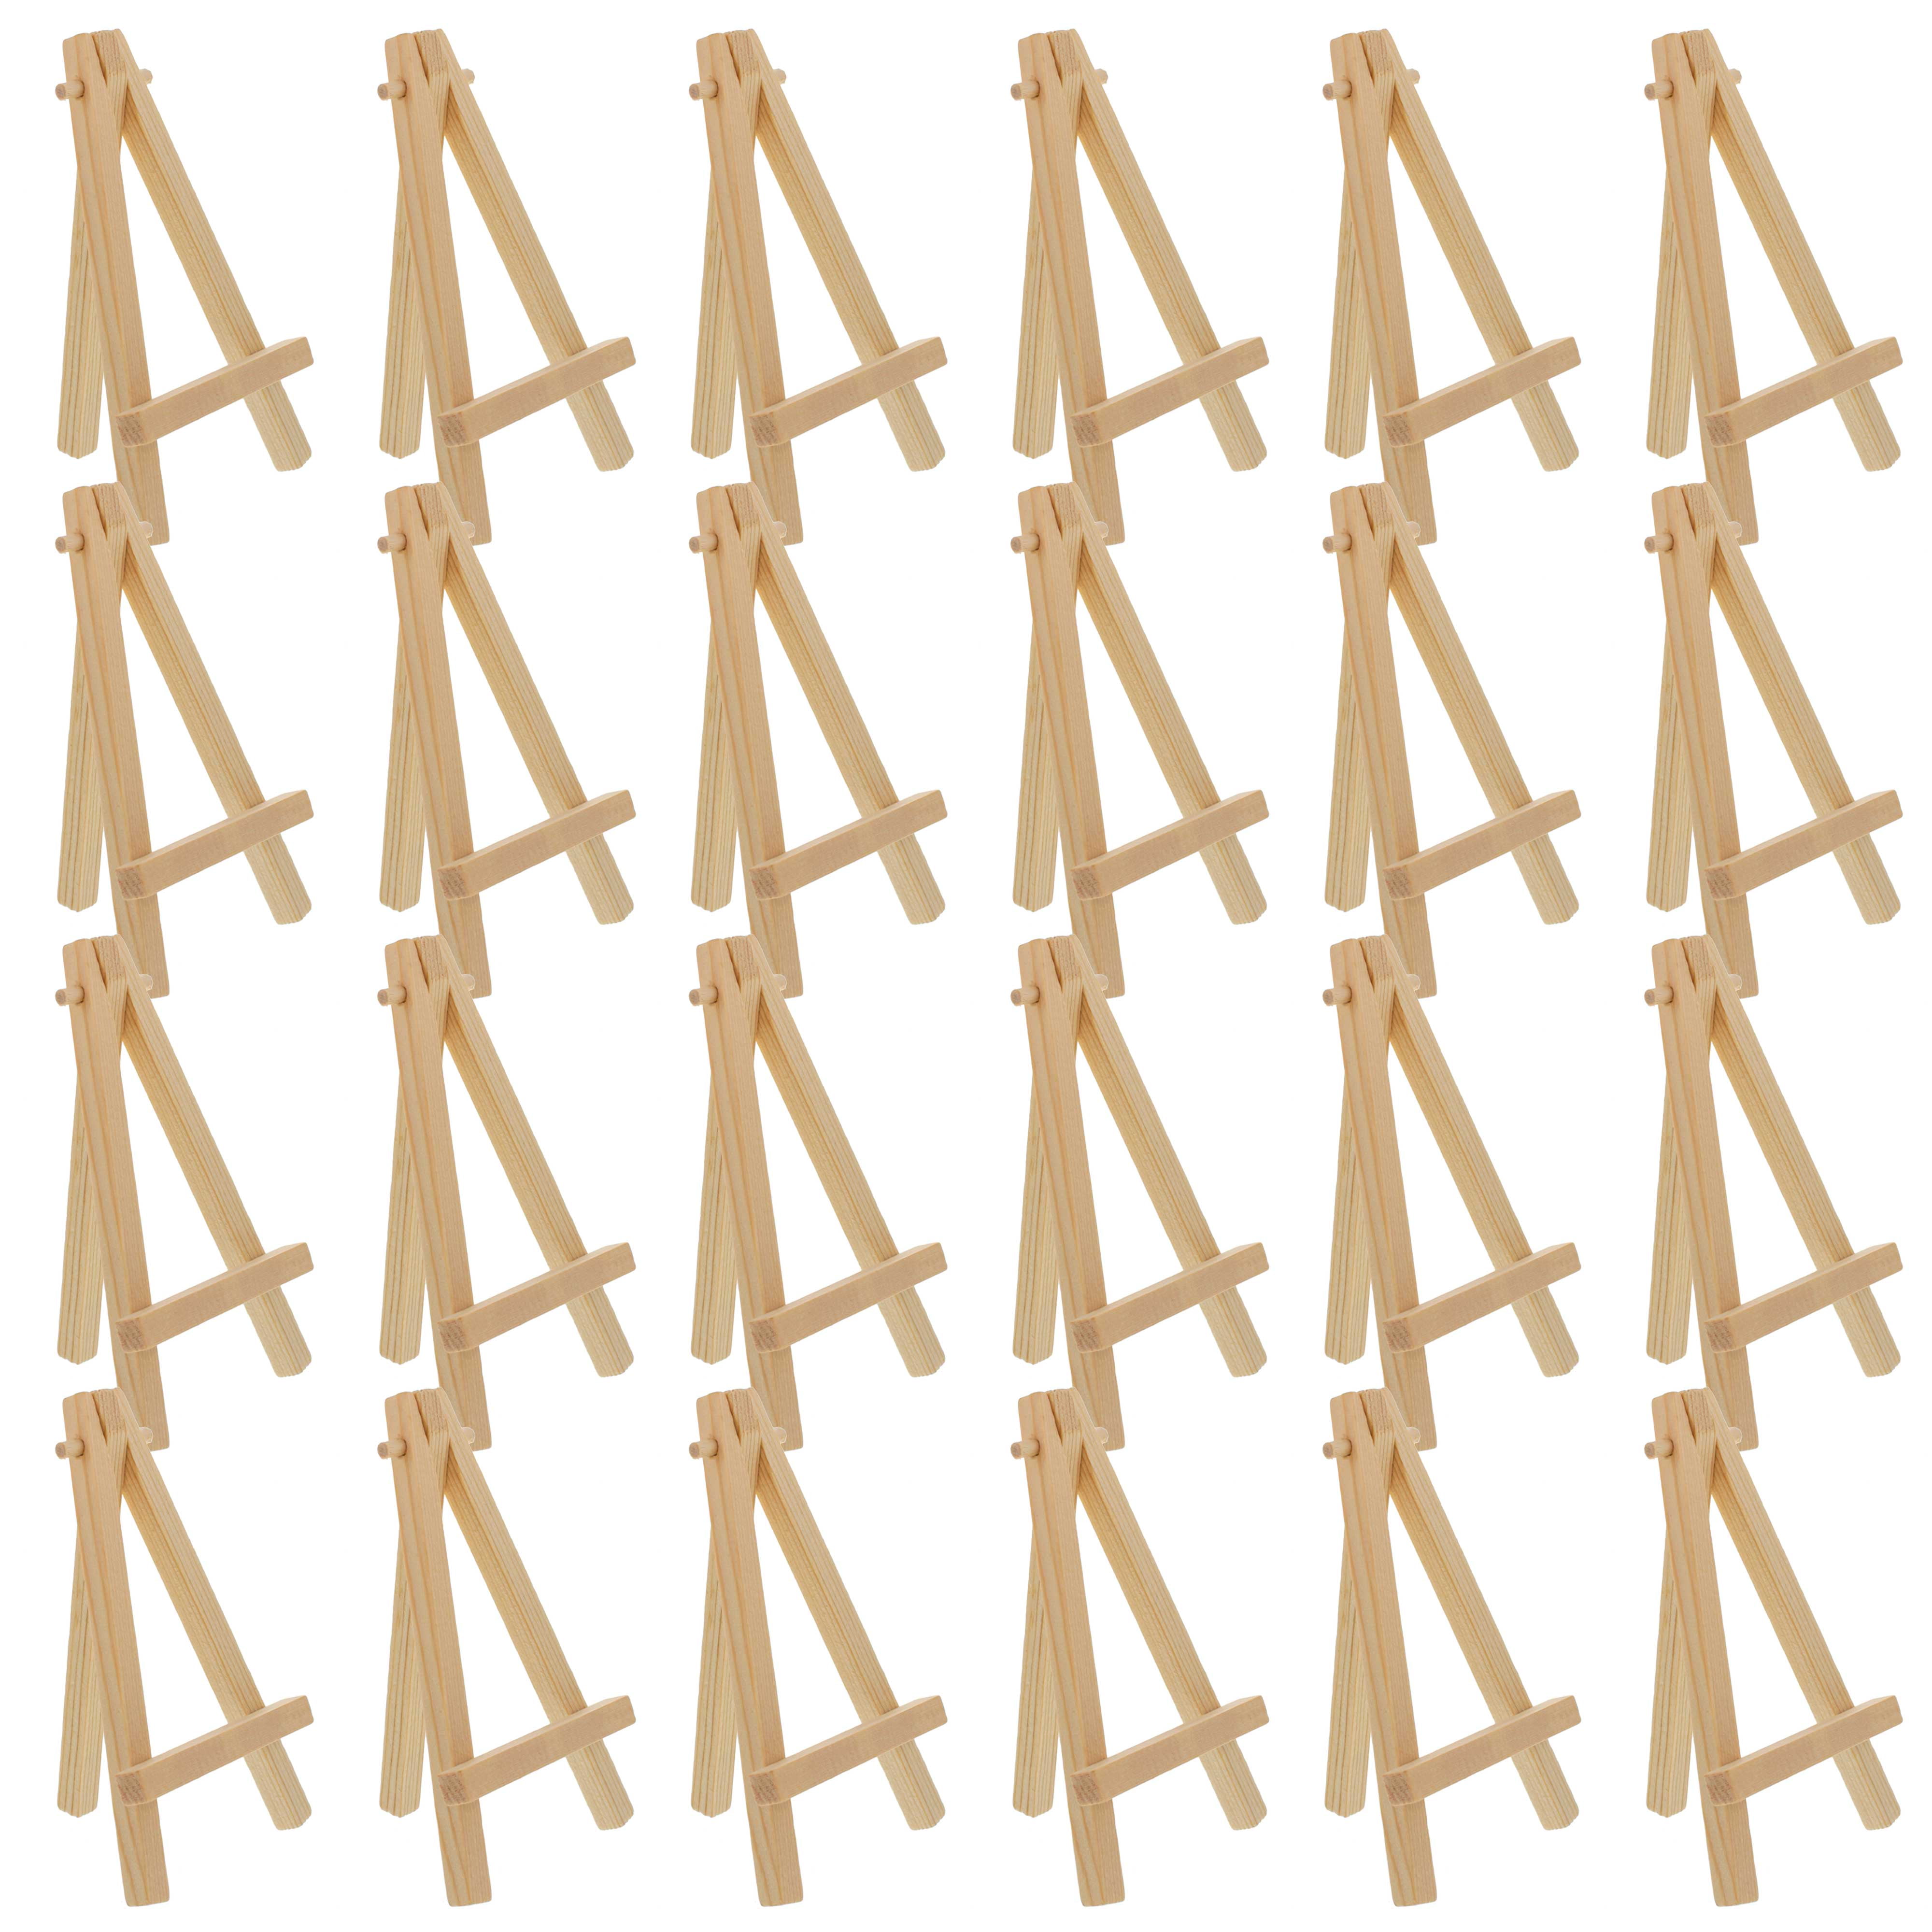 2.75 Inch By 4.7 Inch JETTINGBUY 20 Pcs Mini Wooden Easels Display Tripod Easel Stand for Tabletop Art Craft 